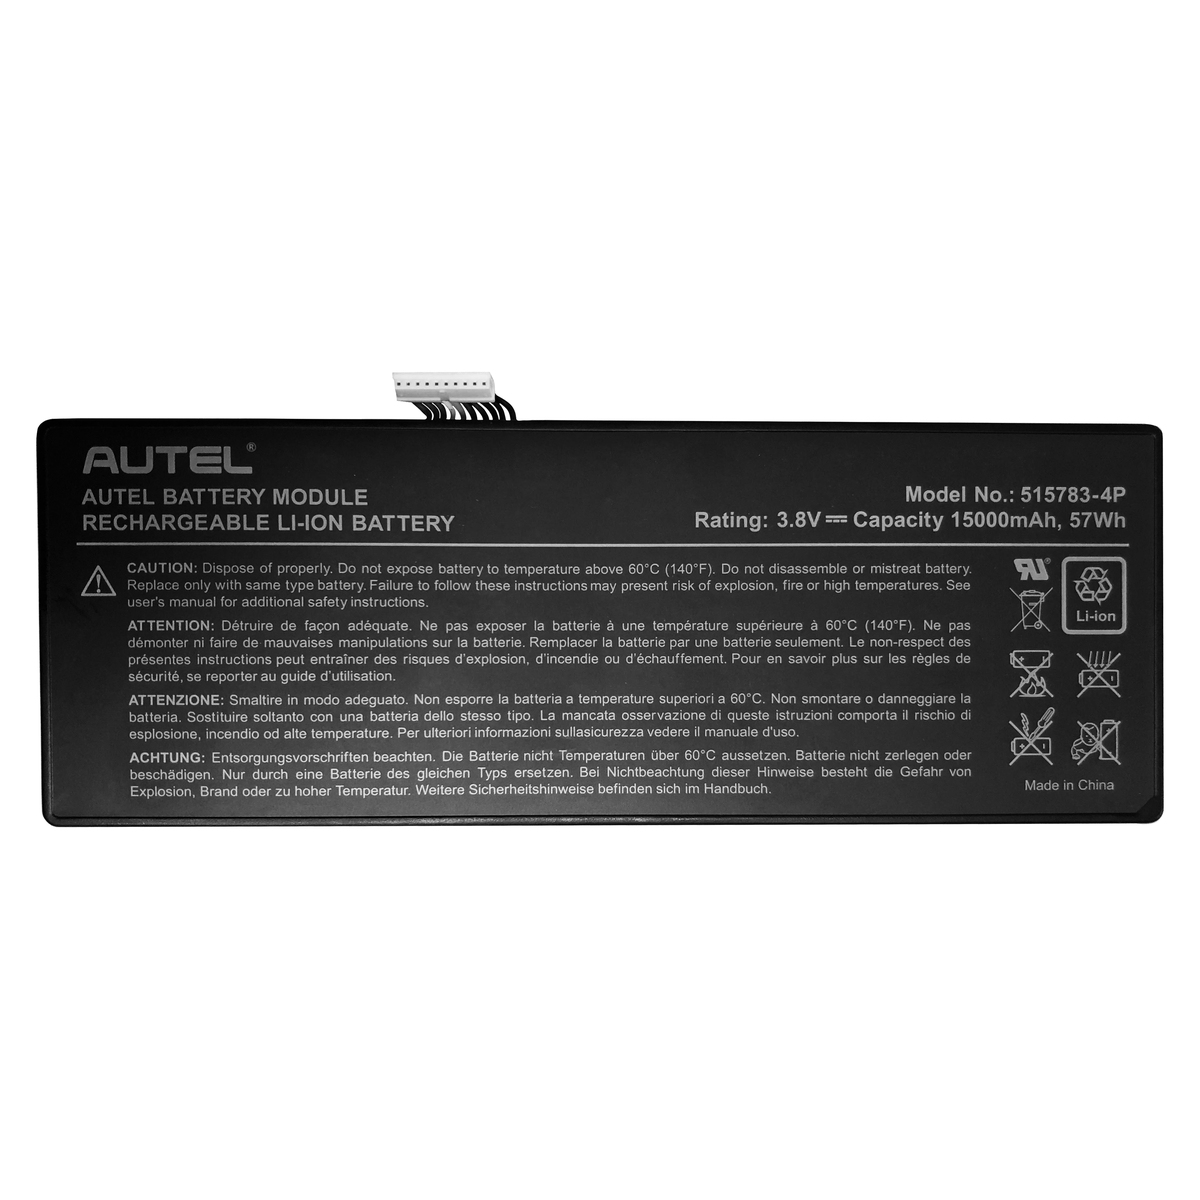 Autel Replacement Battery for IM608Pro